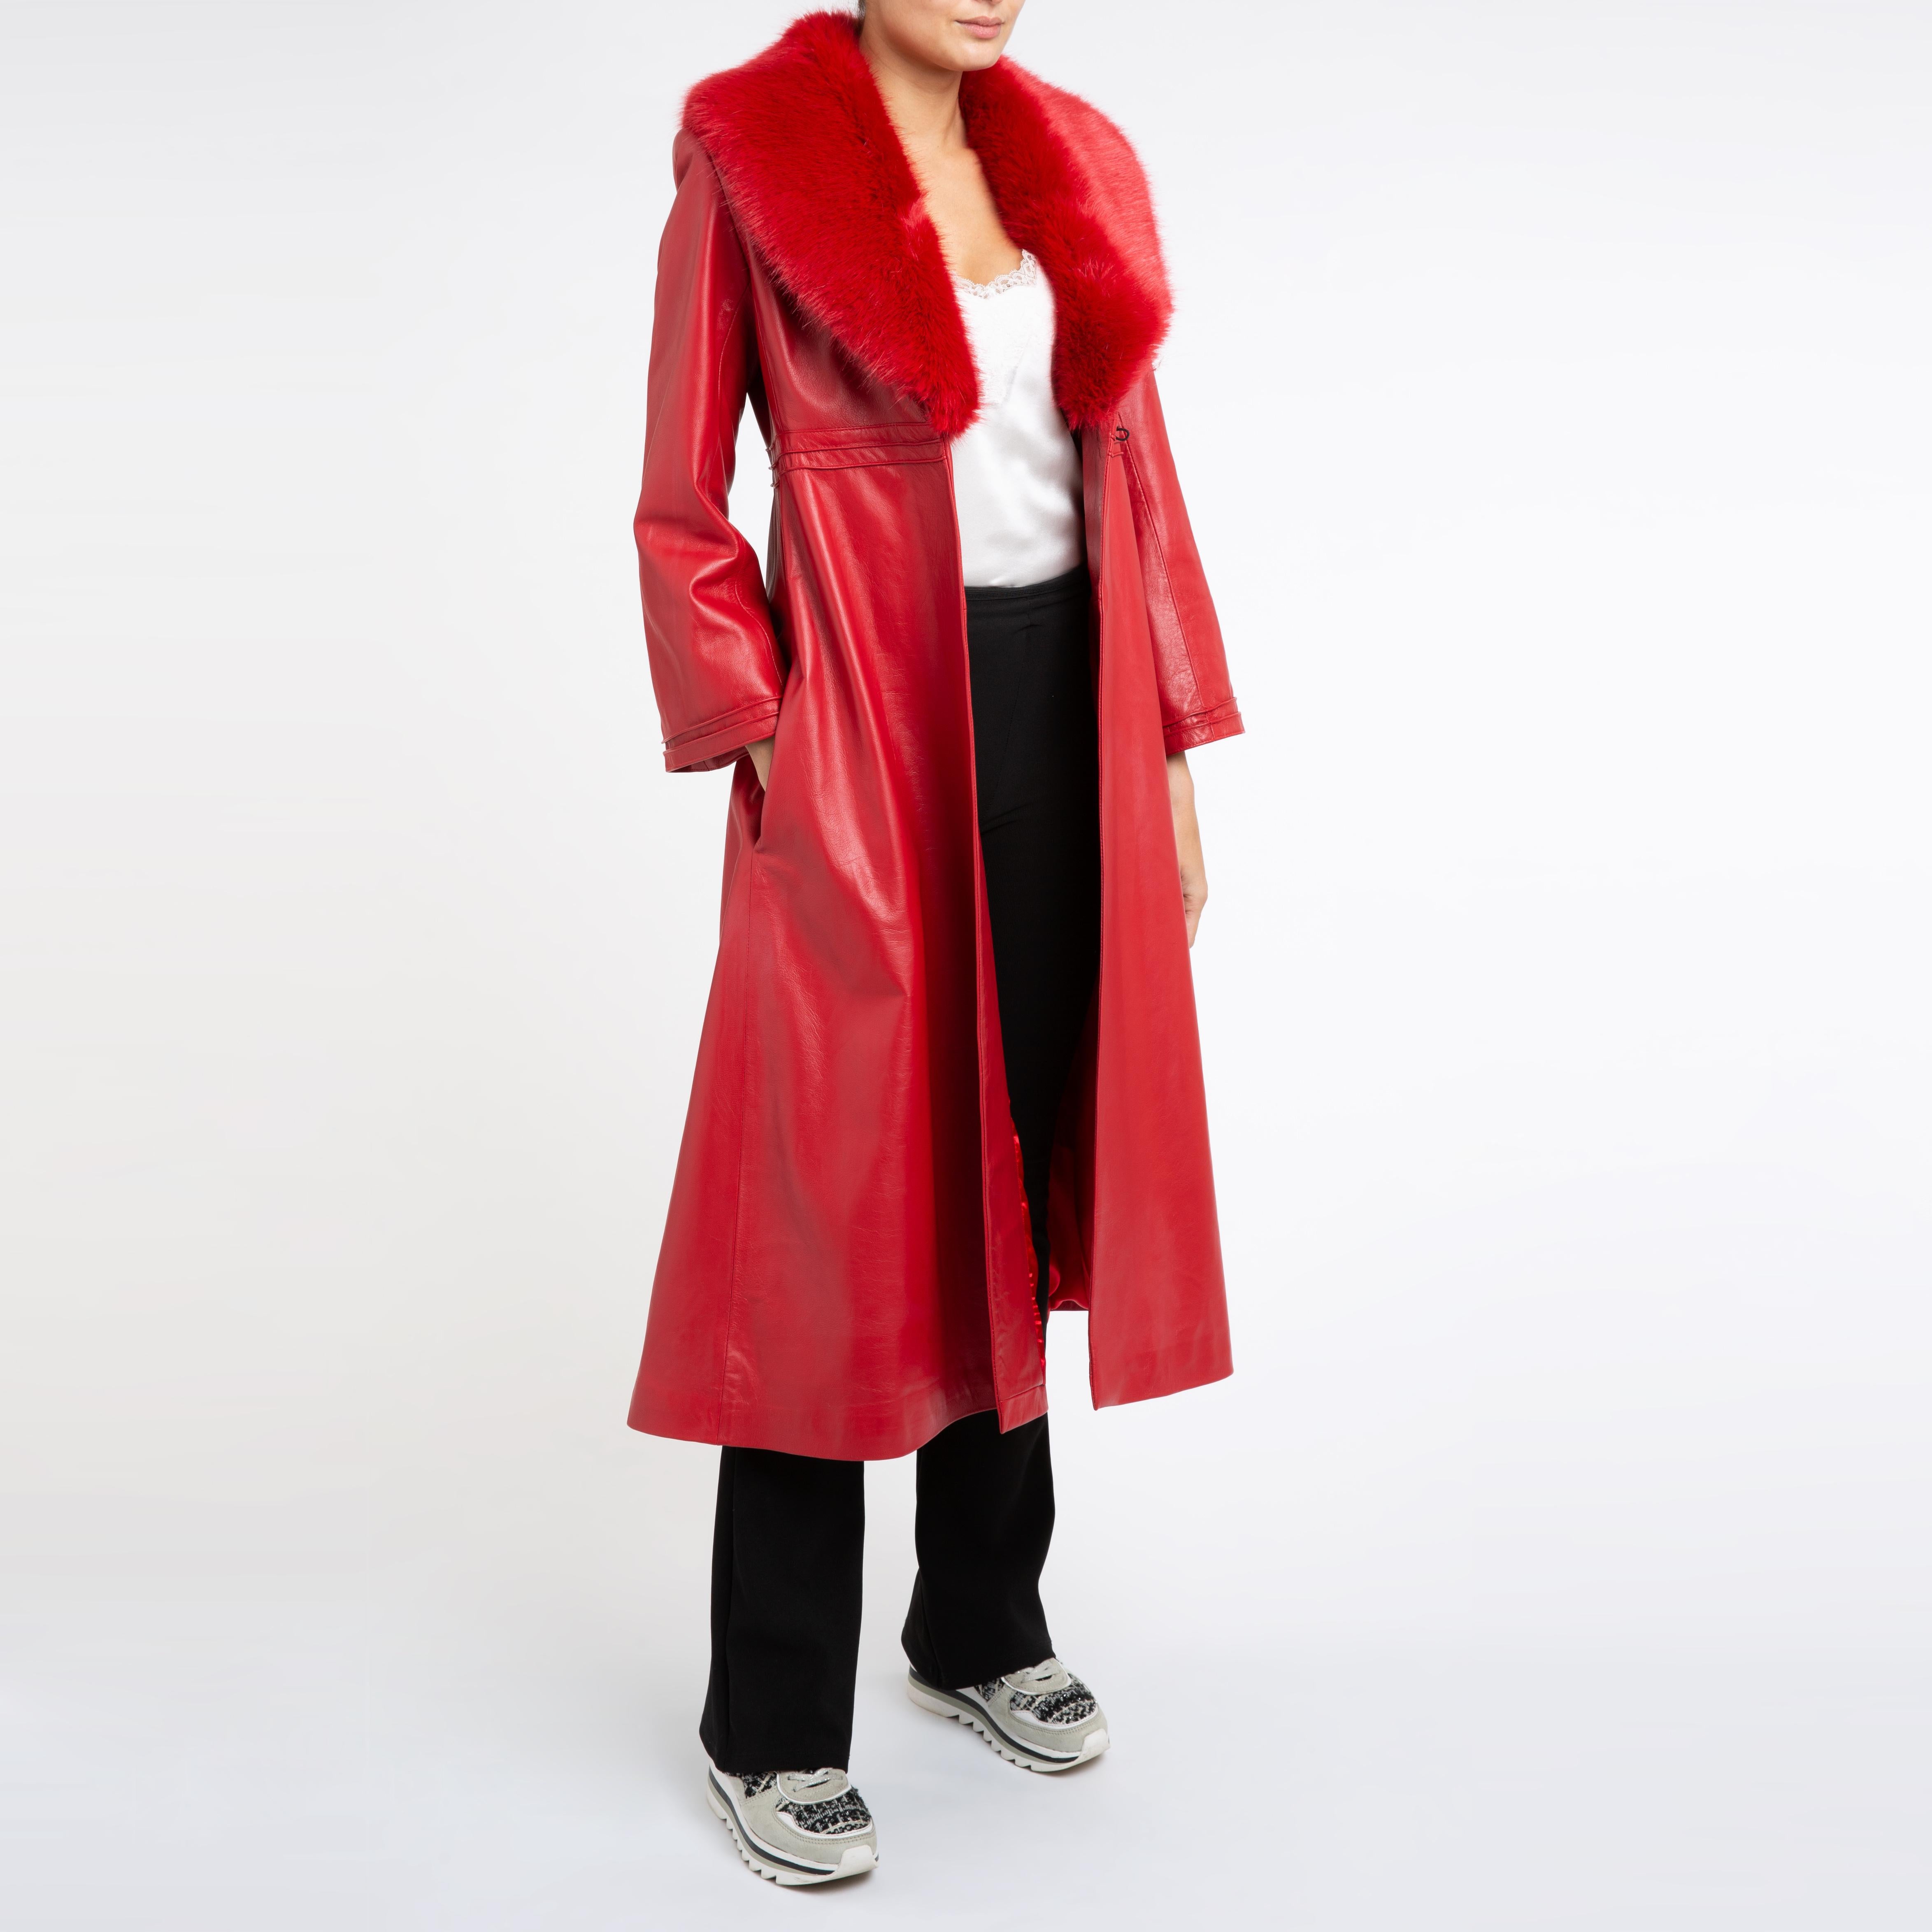 Verheyen London Edward Leather Coat with Faux Fur Collar in Red - Size uk 10

The Edward Leather Coat created by Verheyen London is a romantic design inspired by the 1970s and Edwardian Era of Fashion.  A timeless design to be be worn for a lifetime